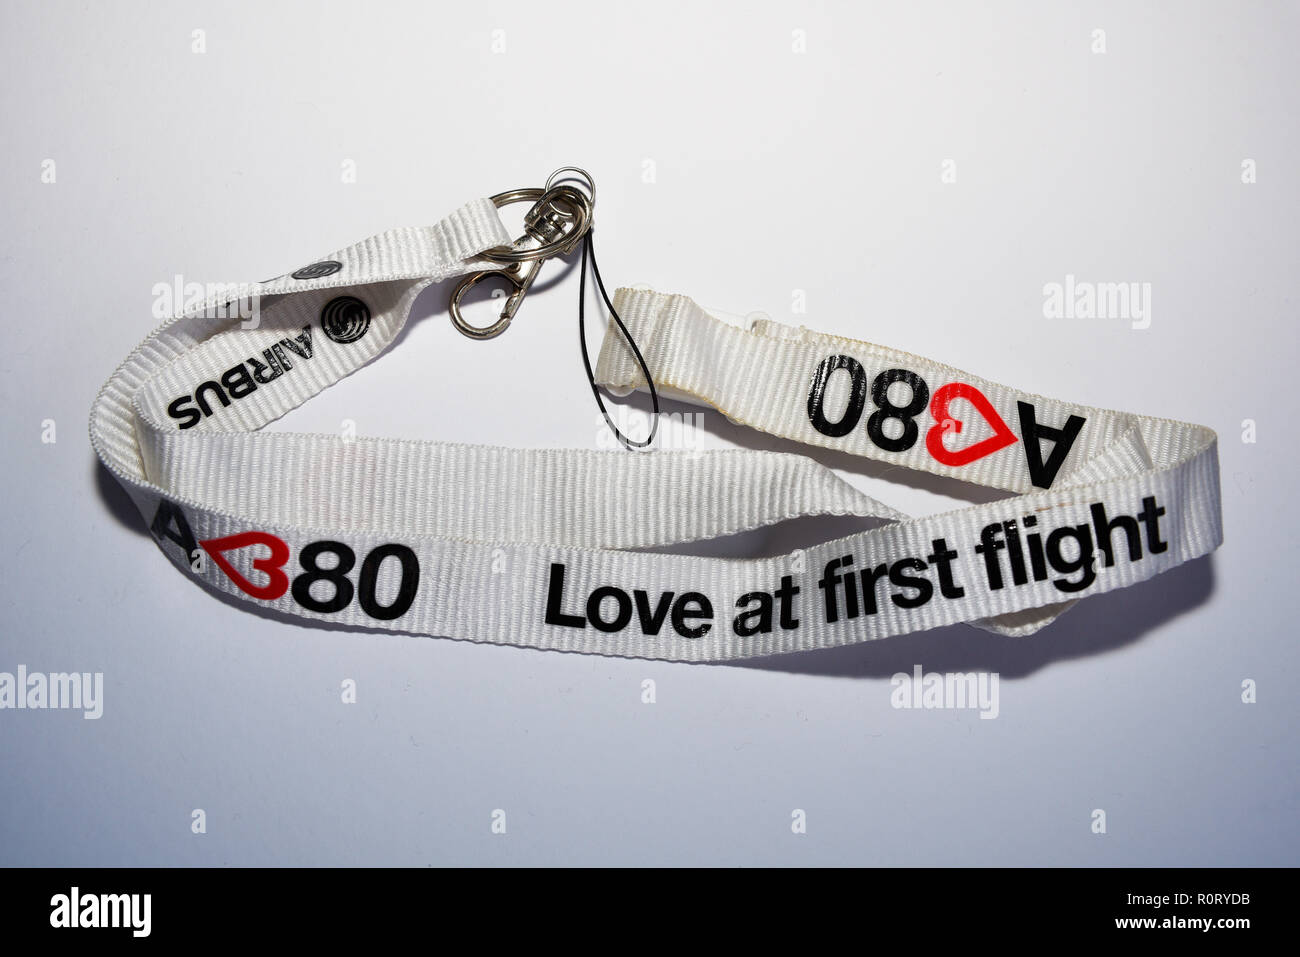 Airbus A380 Love at first flight lanyard, neck strap. Isolated on white background Stock Photo